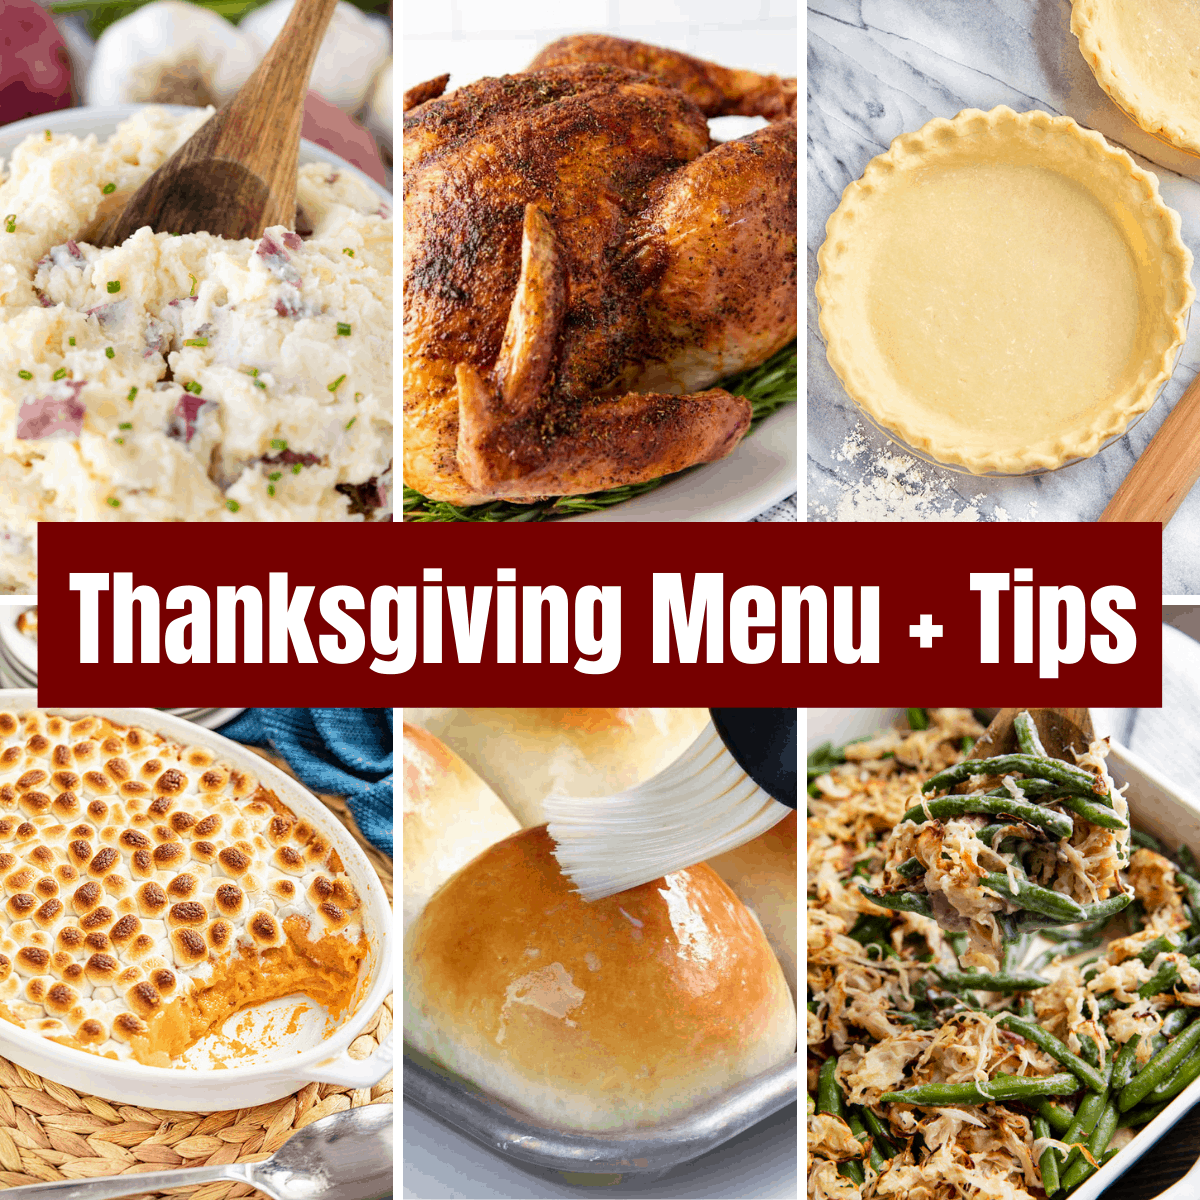 Tips for a Successful Thanksgiving + Recipes